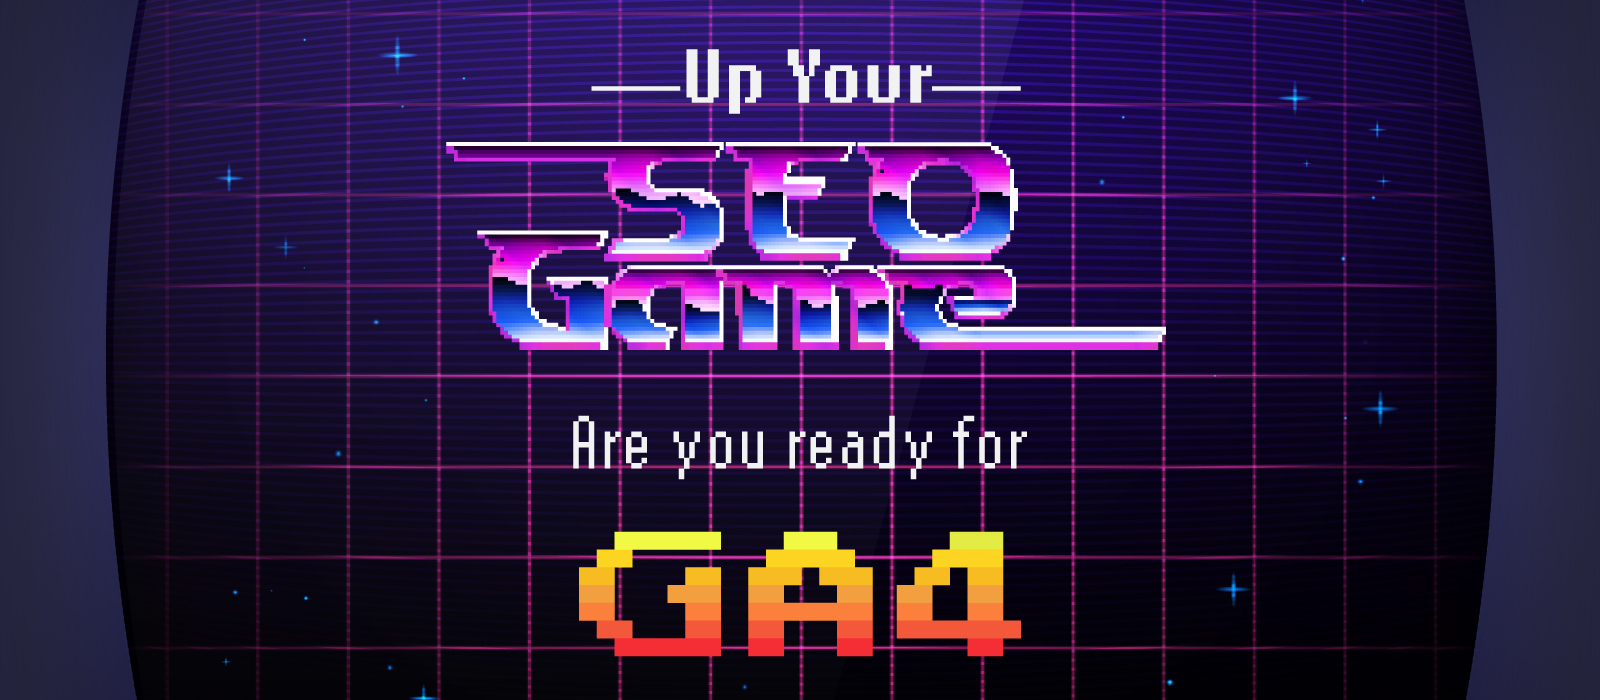 Are you ready for ga4